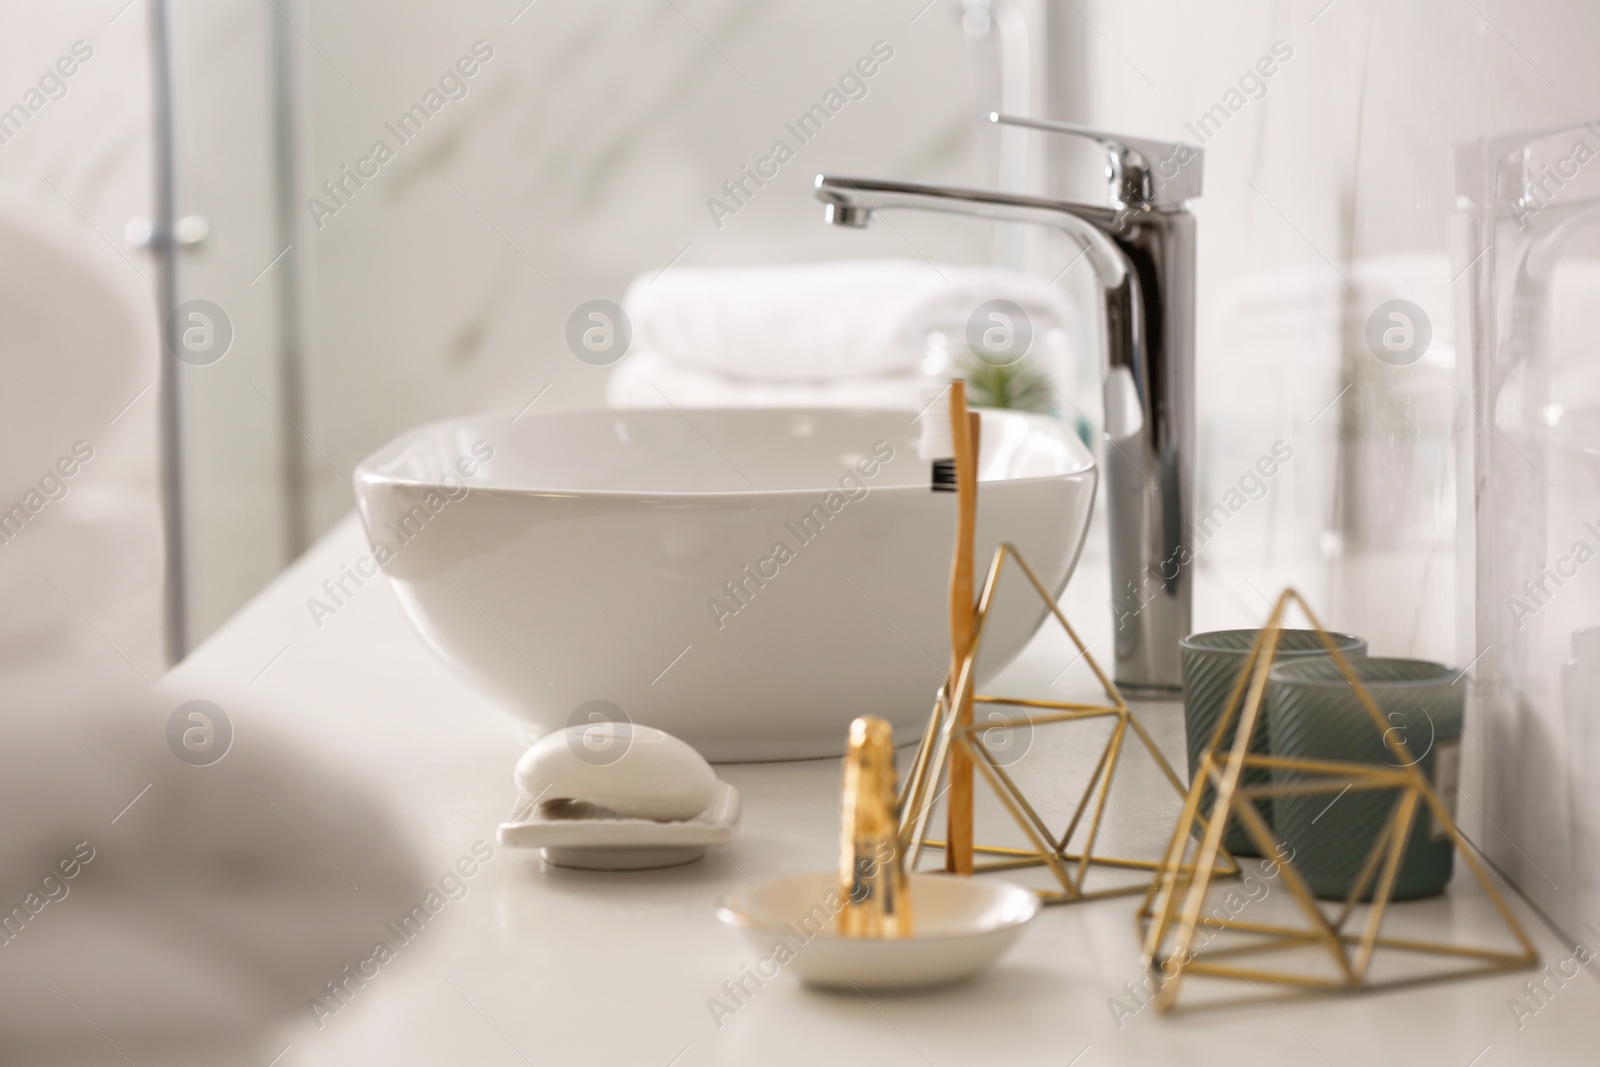 Photo of Toiletries and vessel sink on light countertop in modern bathroom